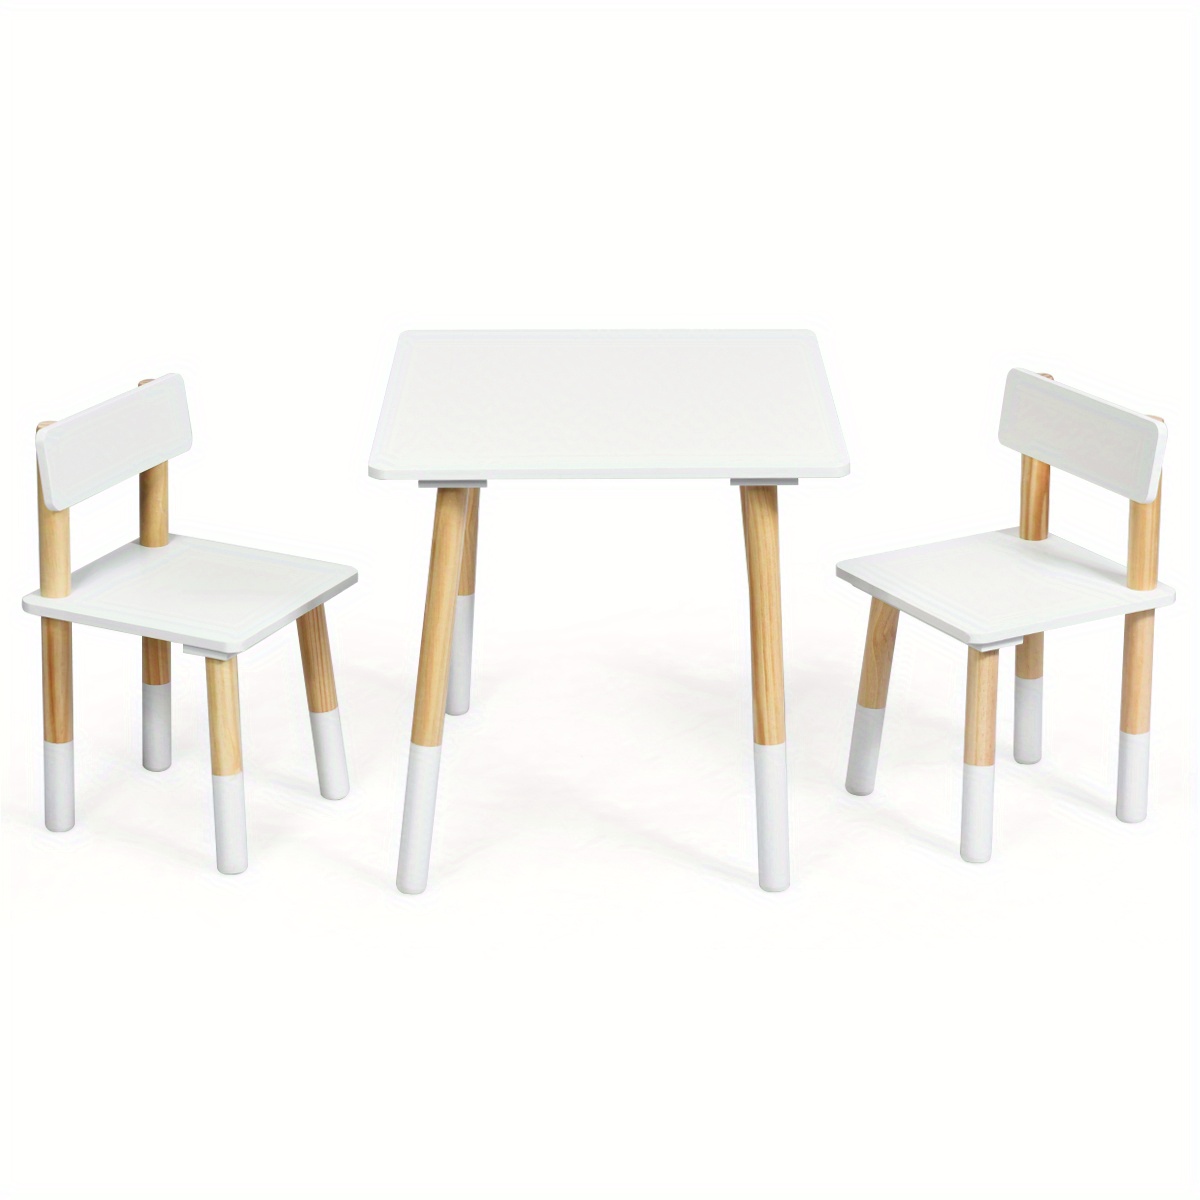 

Lifezeal Kids Wooden Table & 2 Chairs Set Children Activity Table Set For Playing Eating